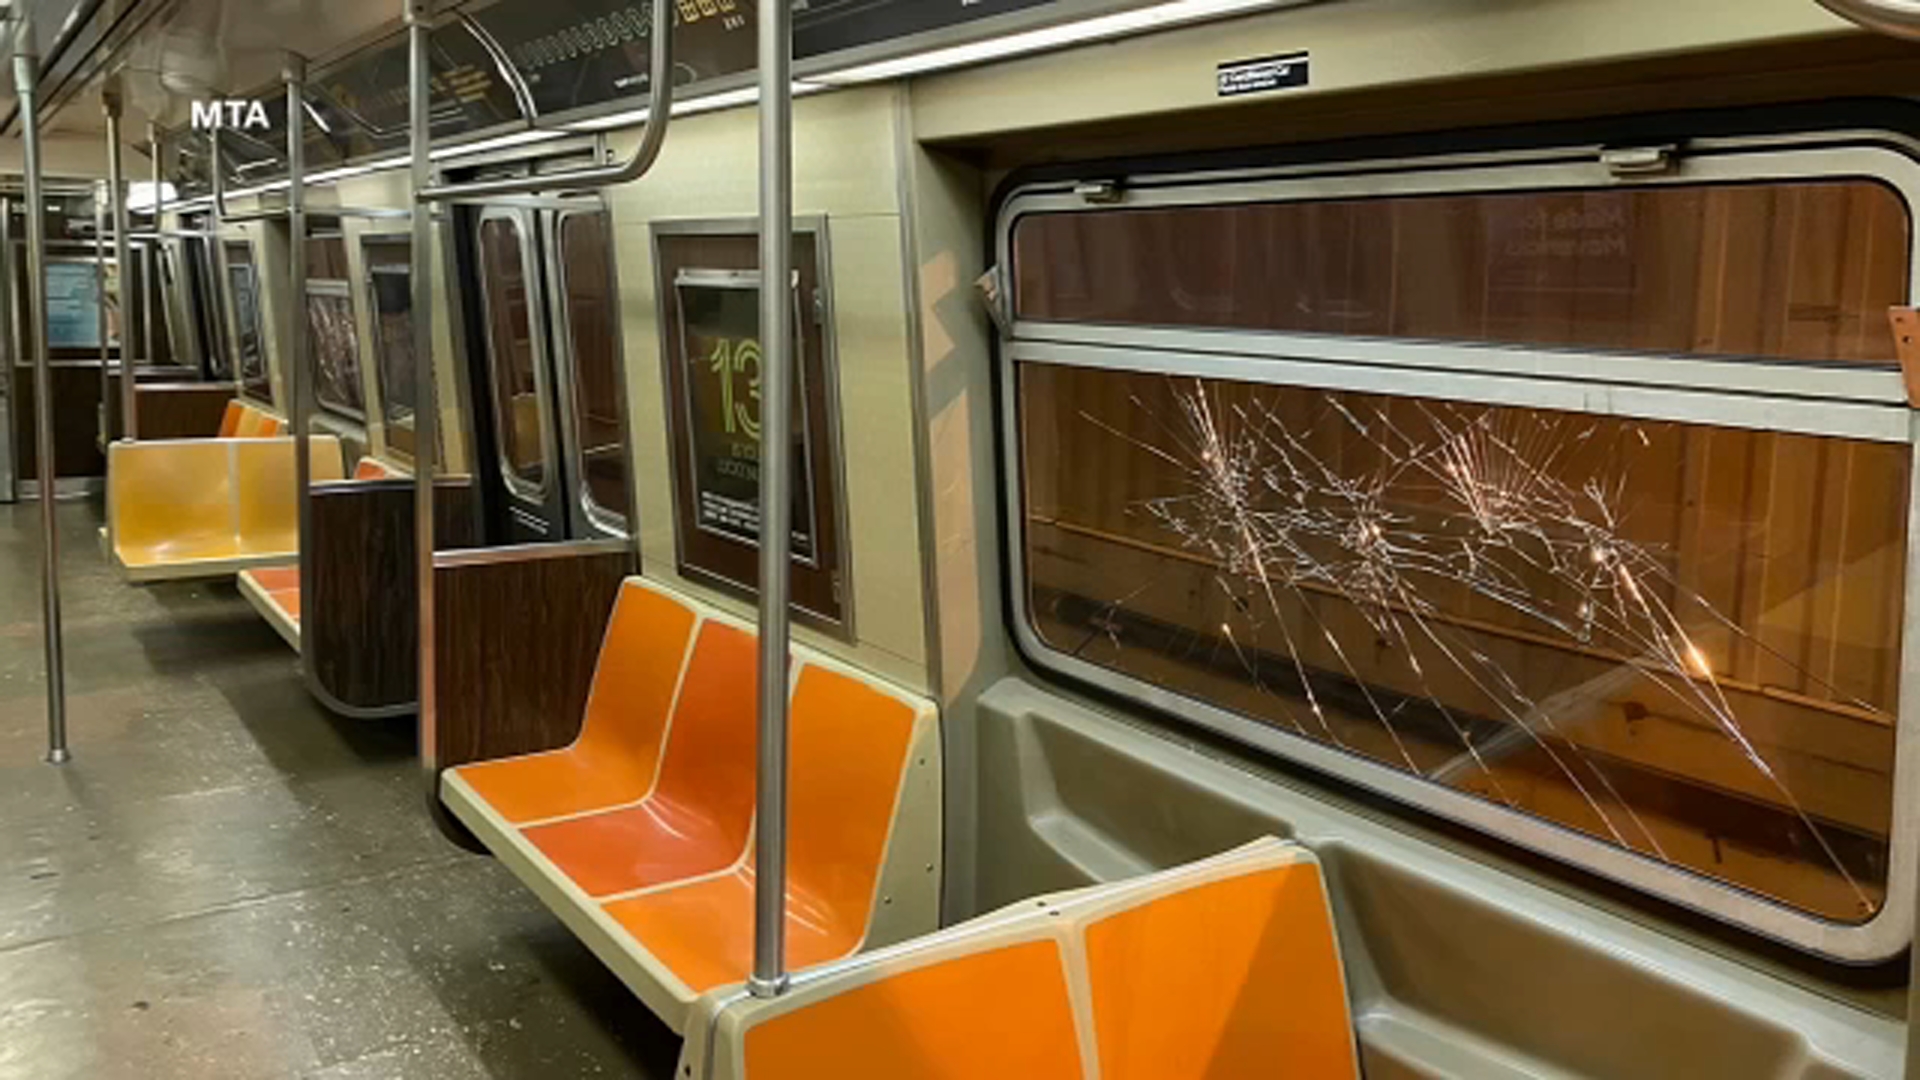 W train service suspended for the day after vandals smash 78 windows on 35 trains